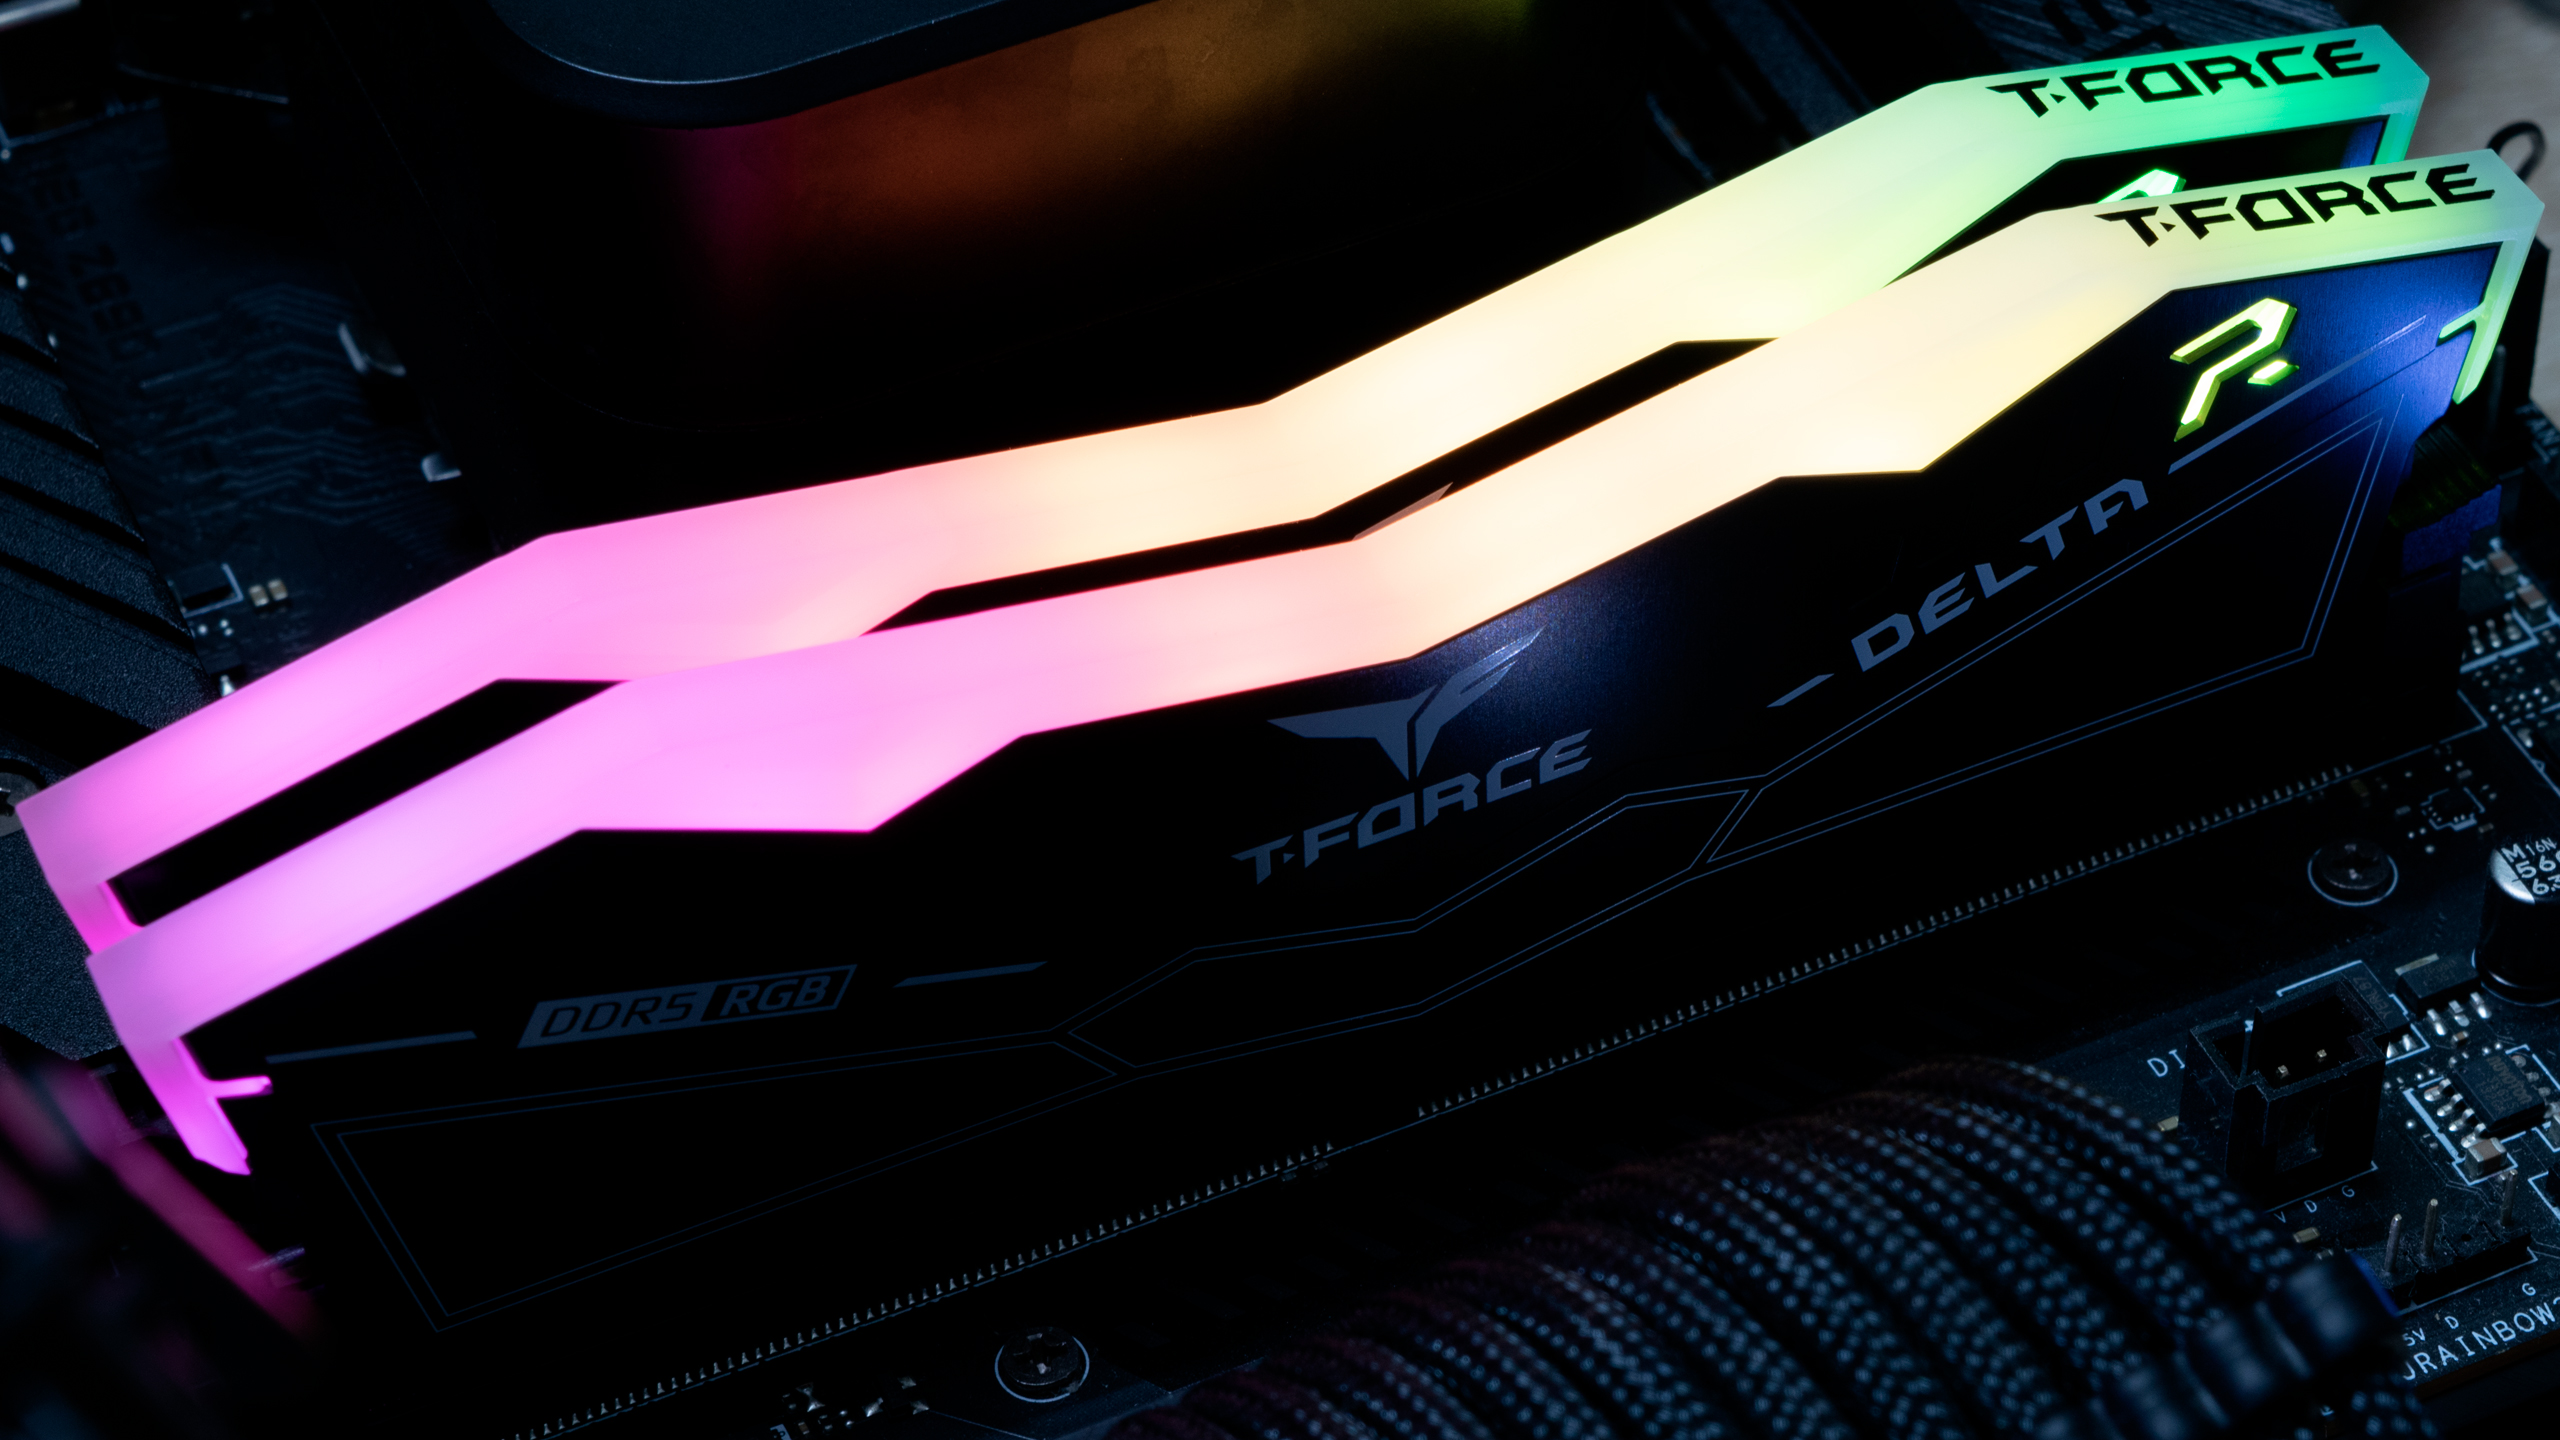 T-Force Delta RGB ddr5-7200. Team Group t-Force Delta RGB. Team Group ddr5 t-Force Delta RGB 48gb. 8gb Team Group t-Force Delta RGB 5200mhz. Team group 6000mhz 32gb